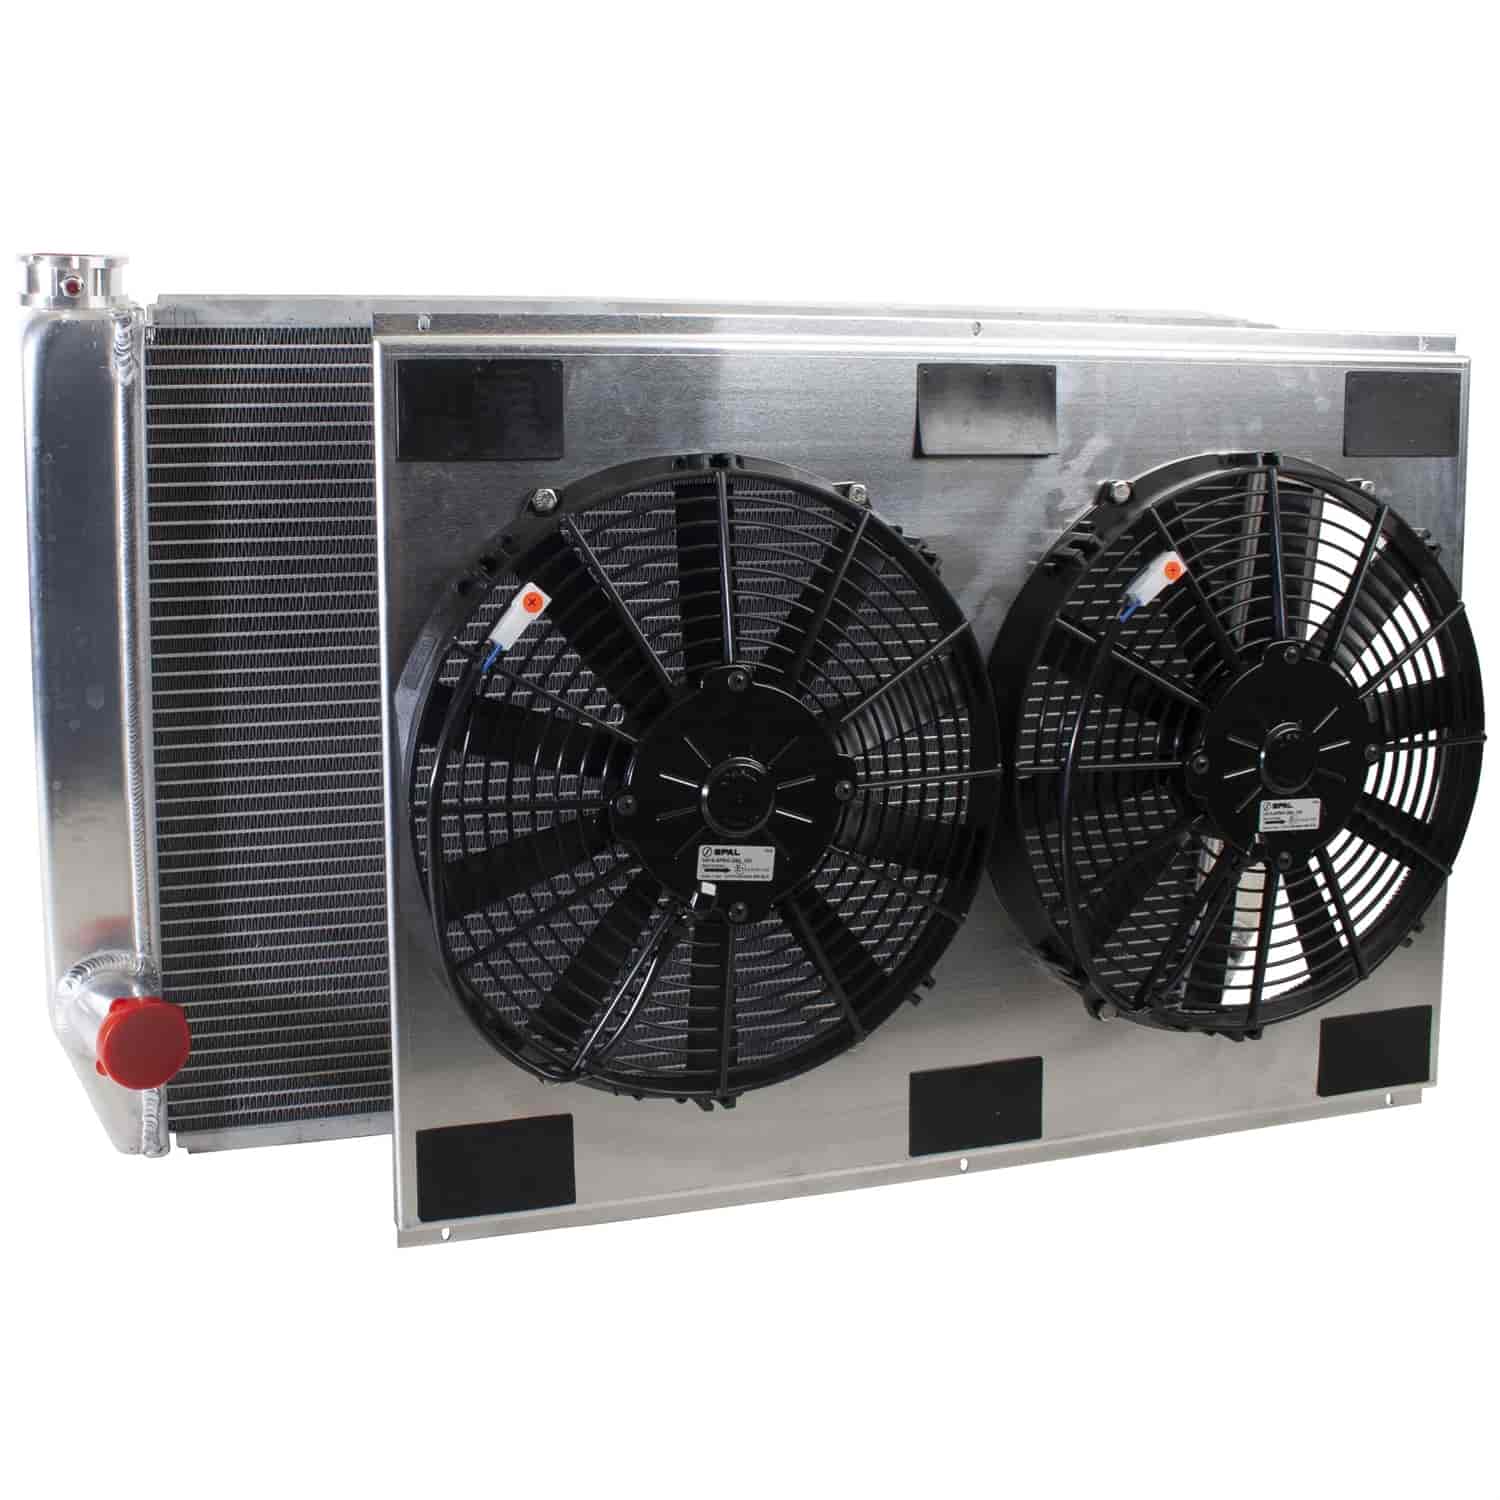 ClassicCool ComboUnit Universal Fit Radiator and Fan Single Pass Crossflow Design 31" x 19" with No Options